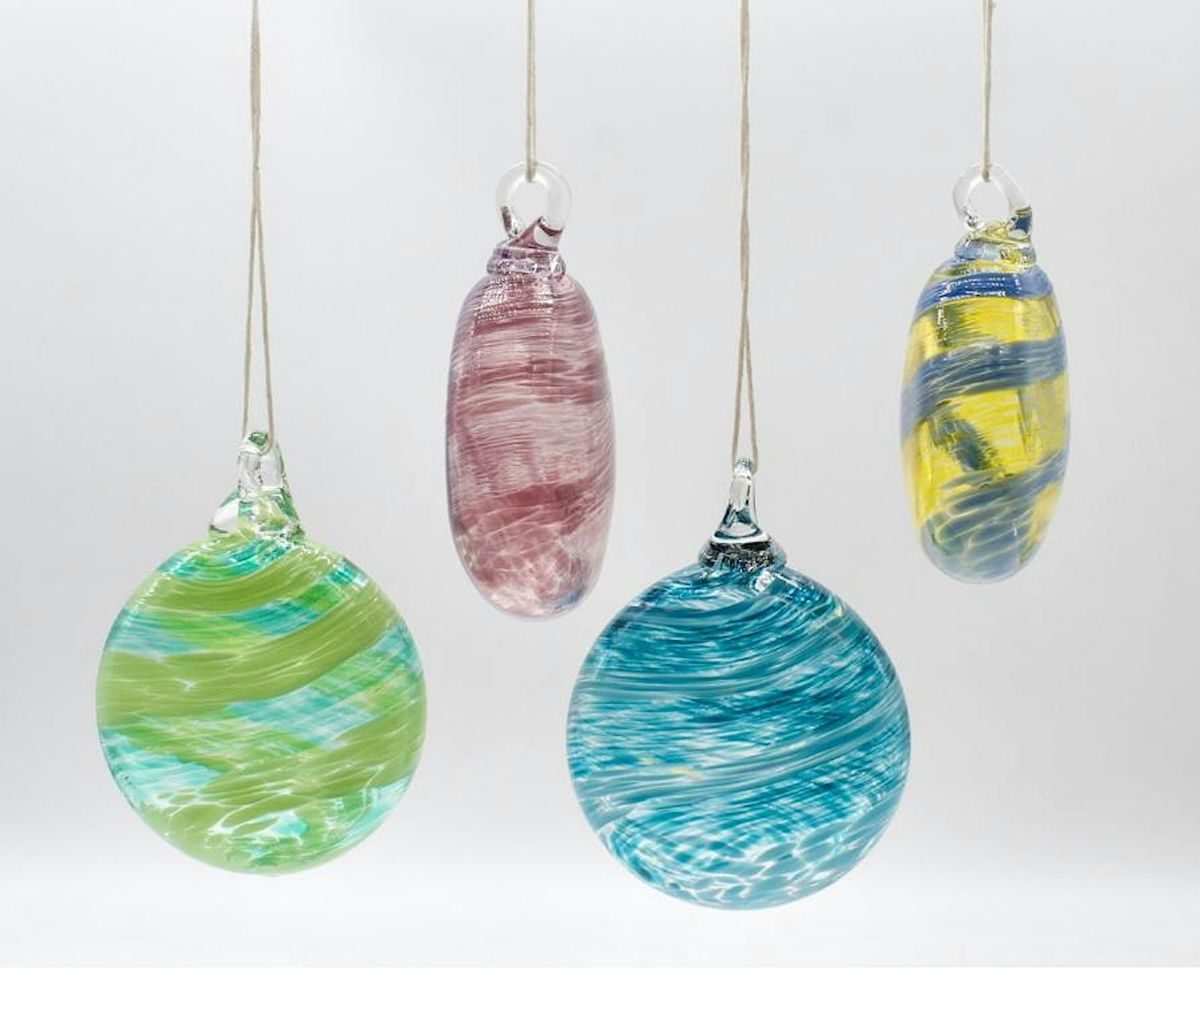 Twisted then blown, you make your suncatcher out of your favorite colors!